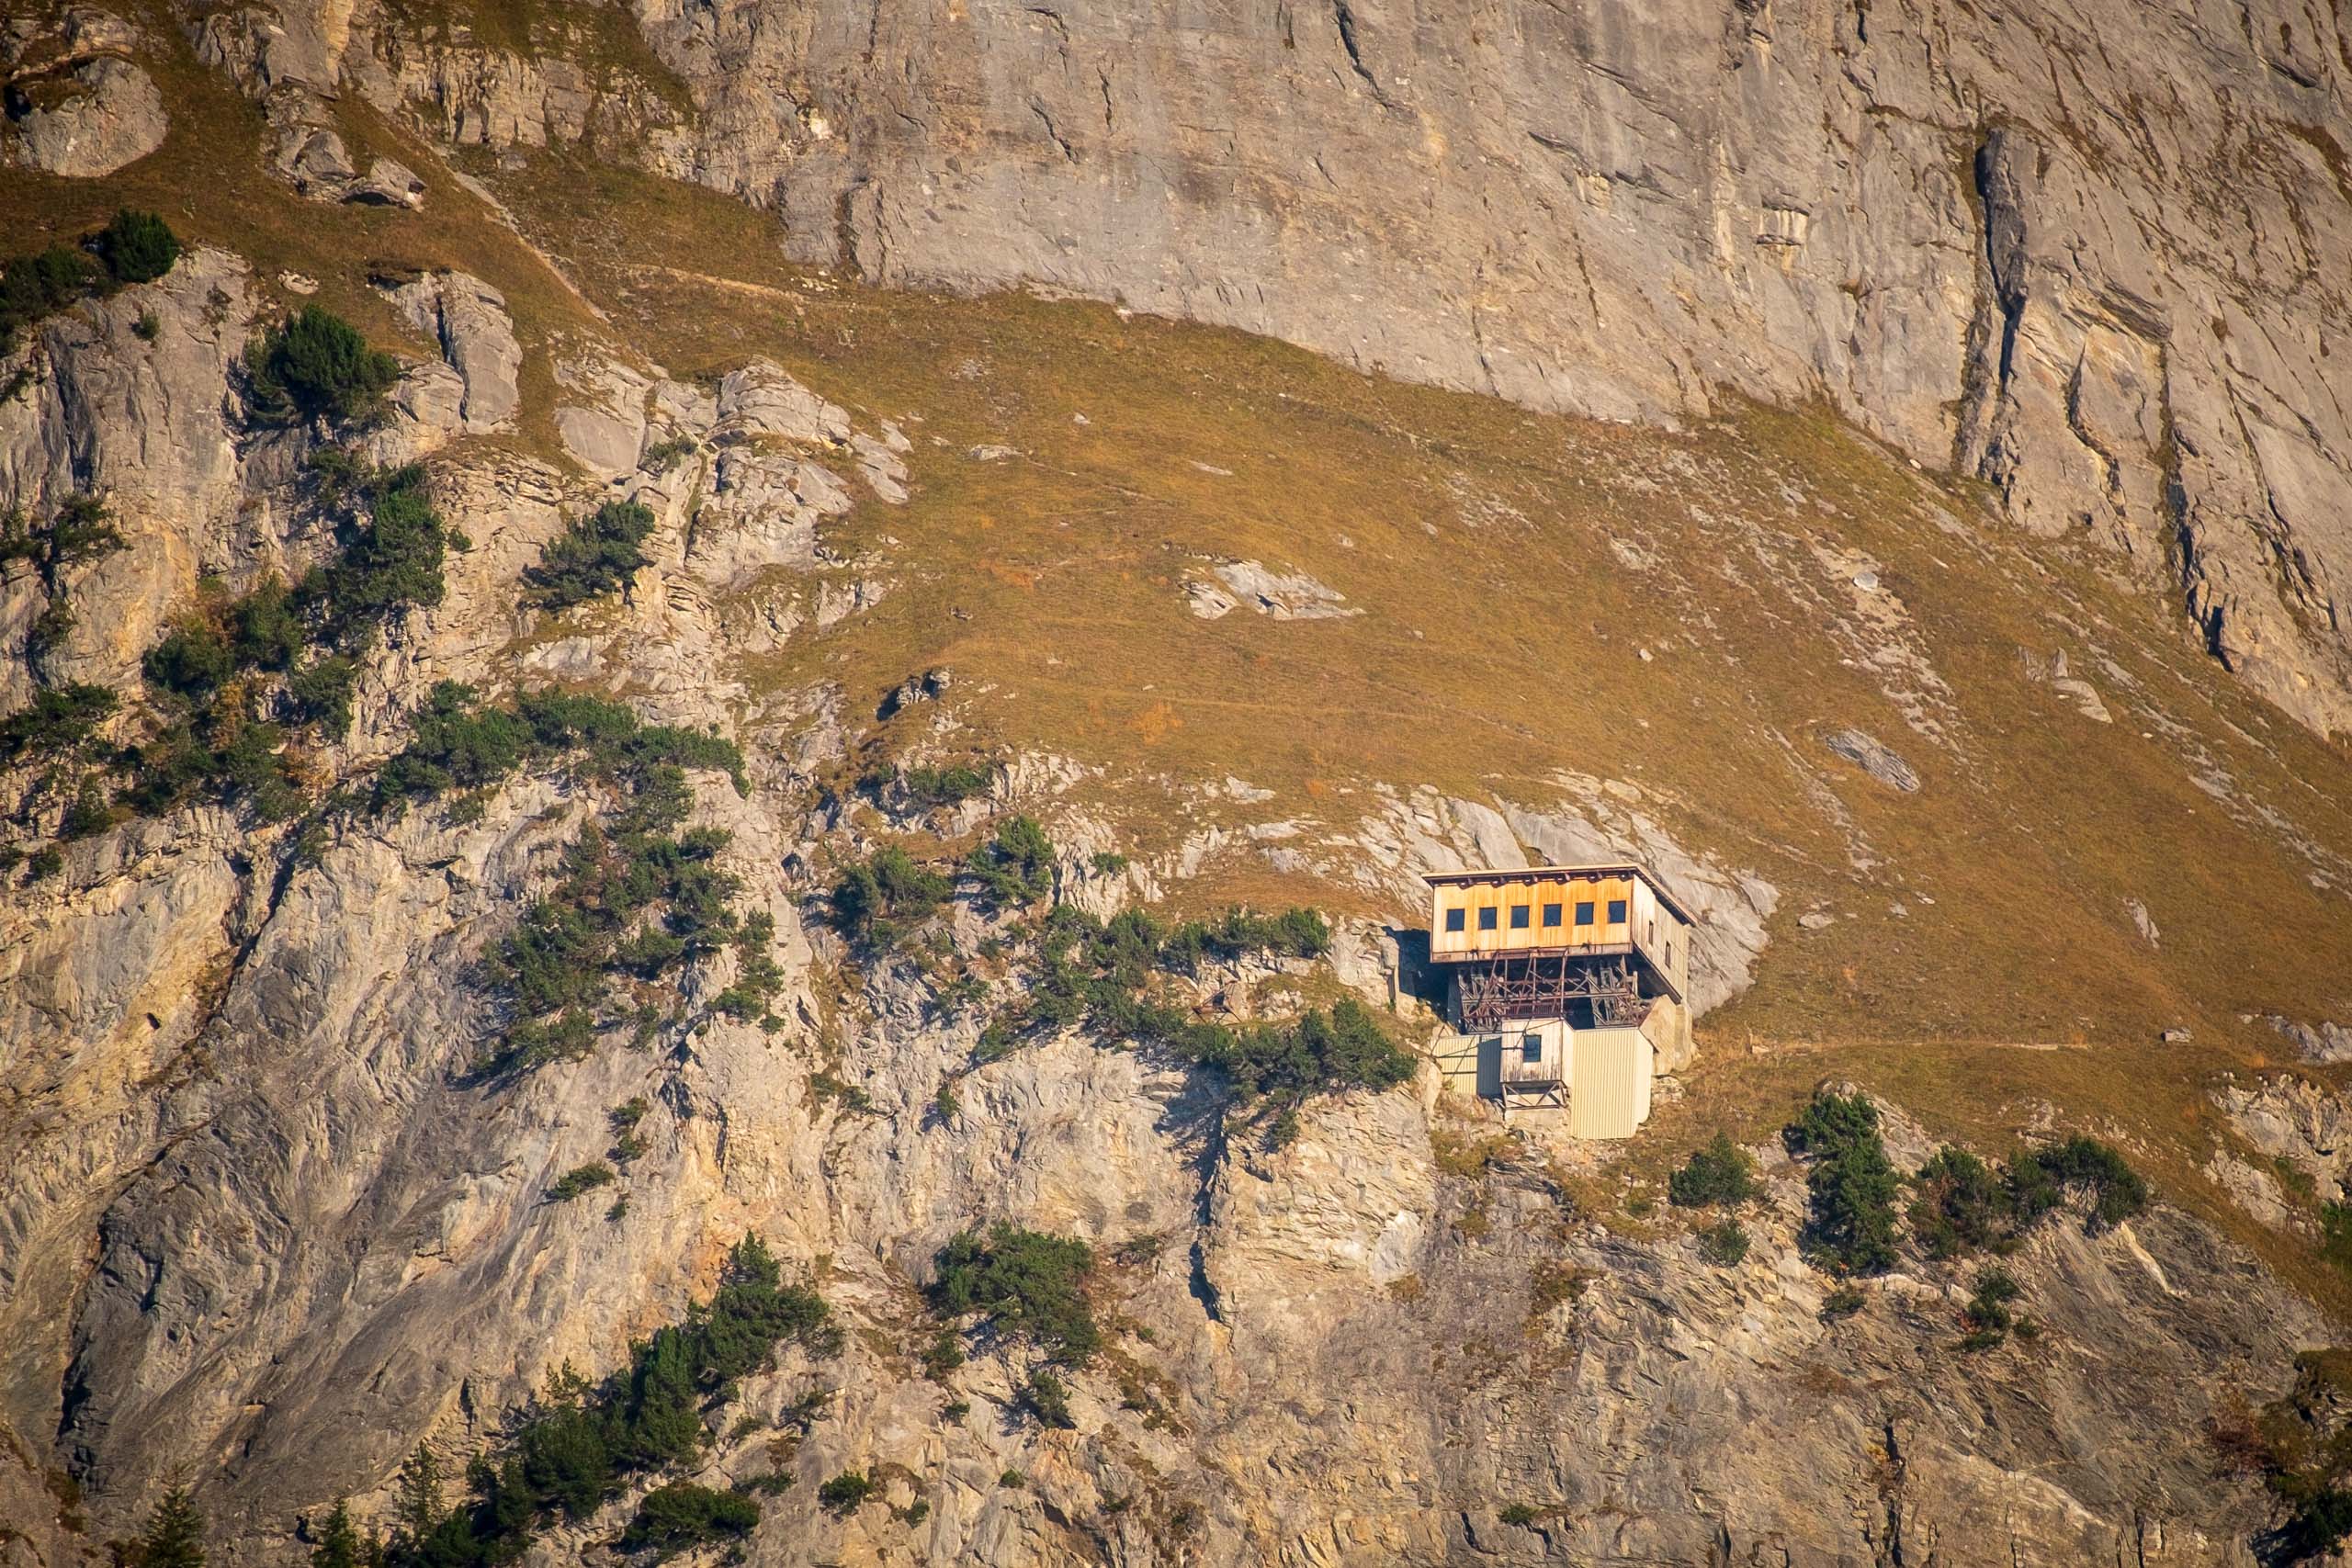 The old cable-car station on the Wetterhorn in Switzerland